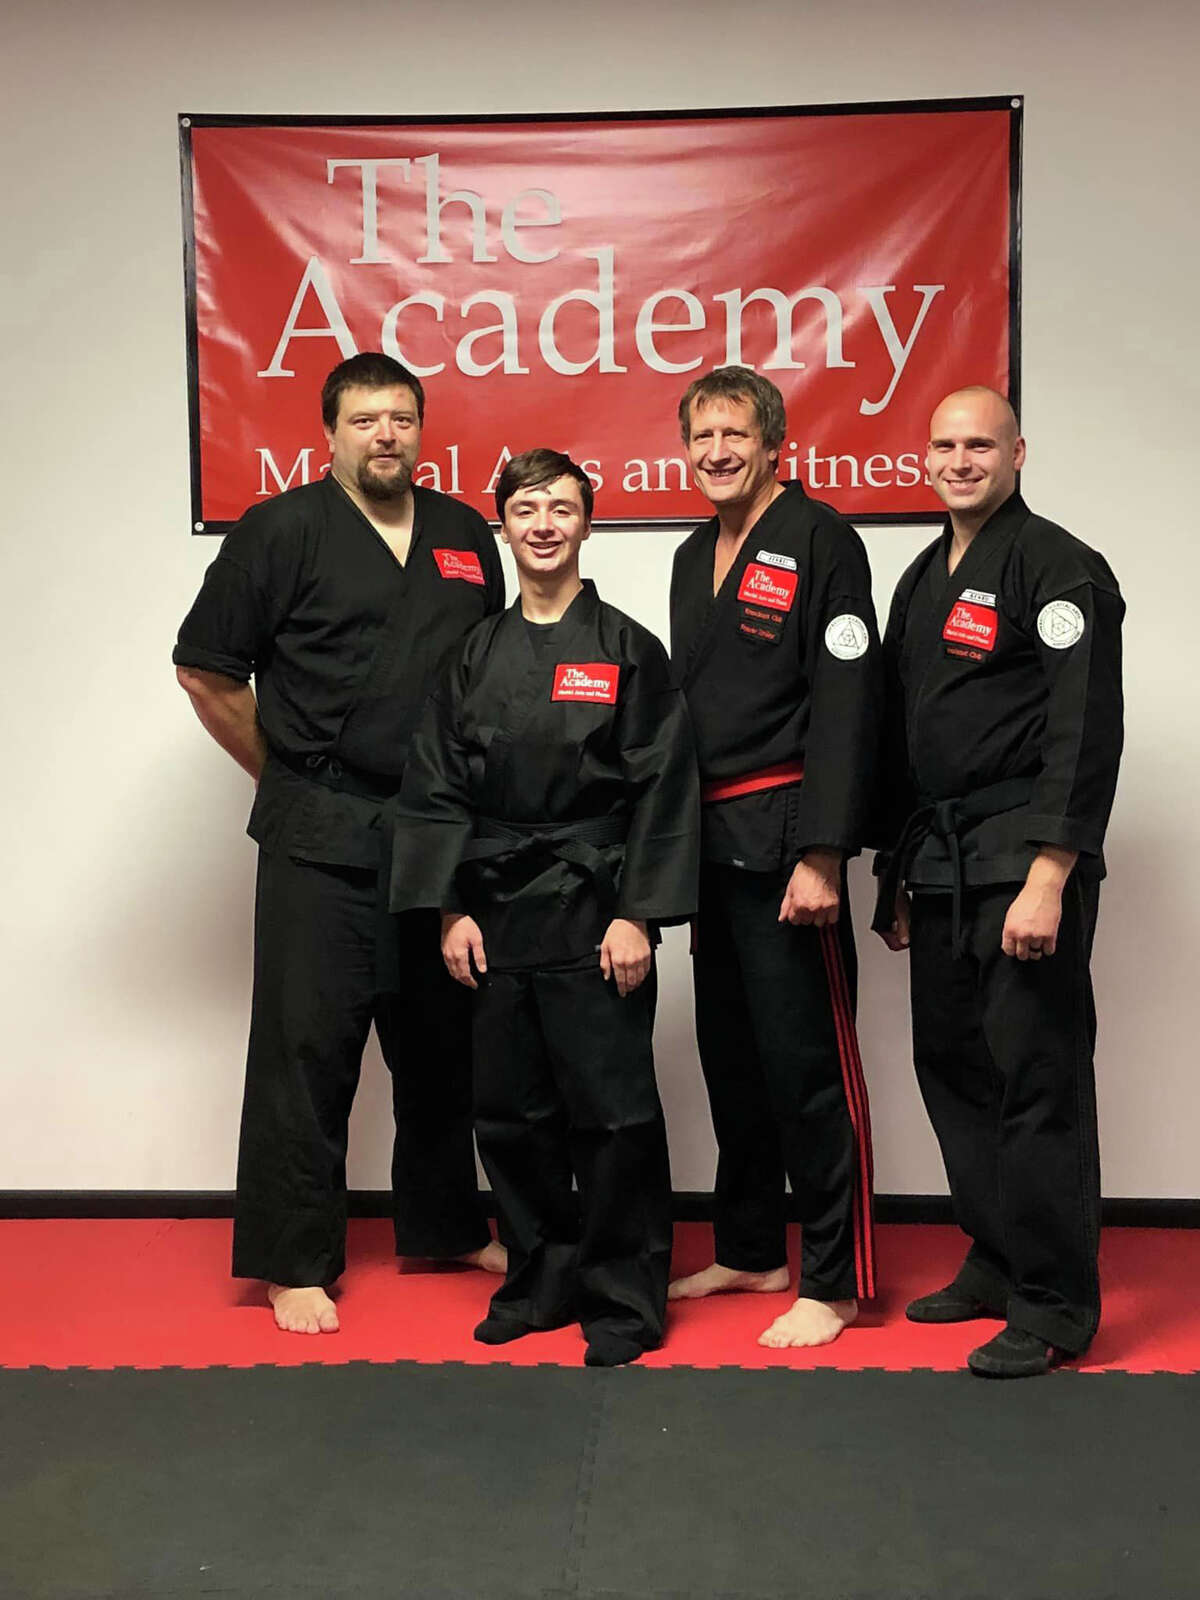 Jonah Bright (second from left) poses with The Academy instructors (from left) Ben Stacy, Craig Sira, and Jacob Sira after earning his black belt recently.